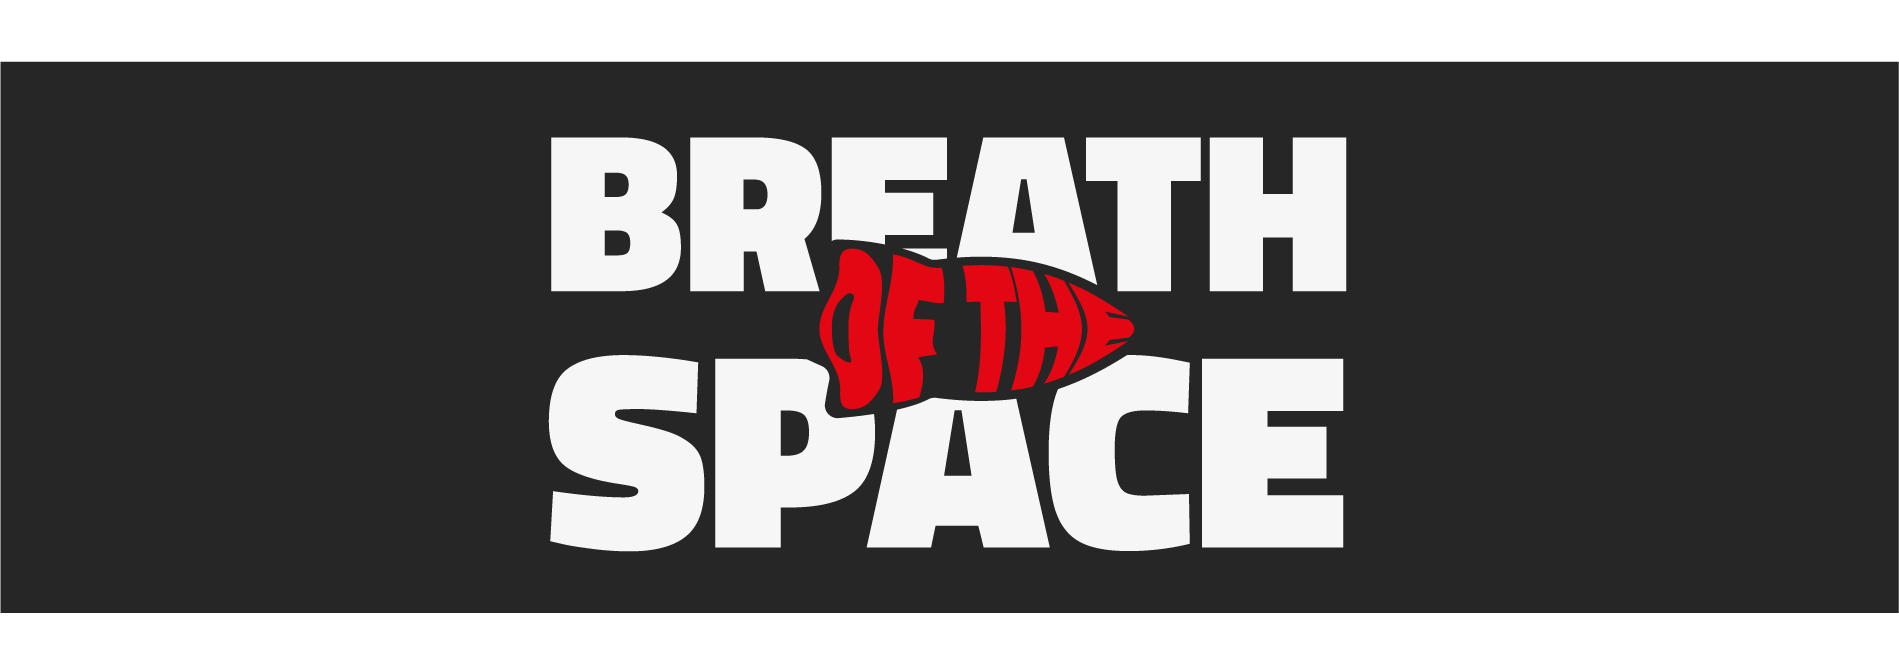 Breath Of The Space